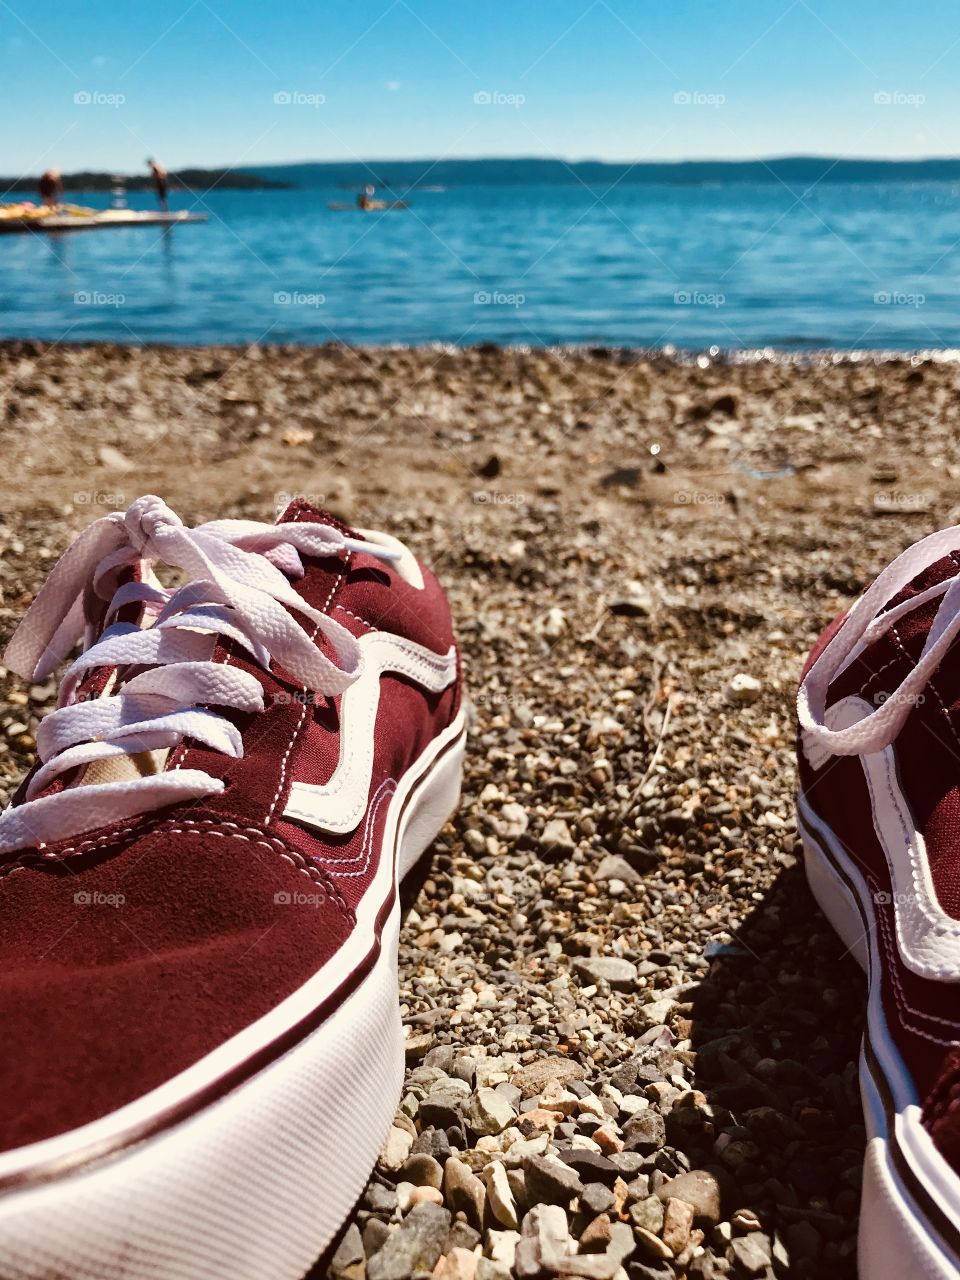 Cillin at the beach, thanks to vans for the cool shoes